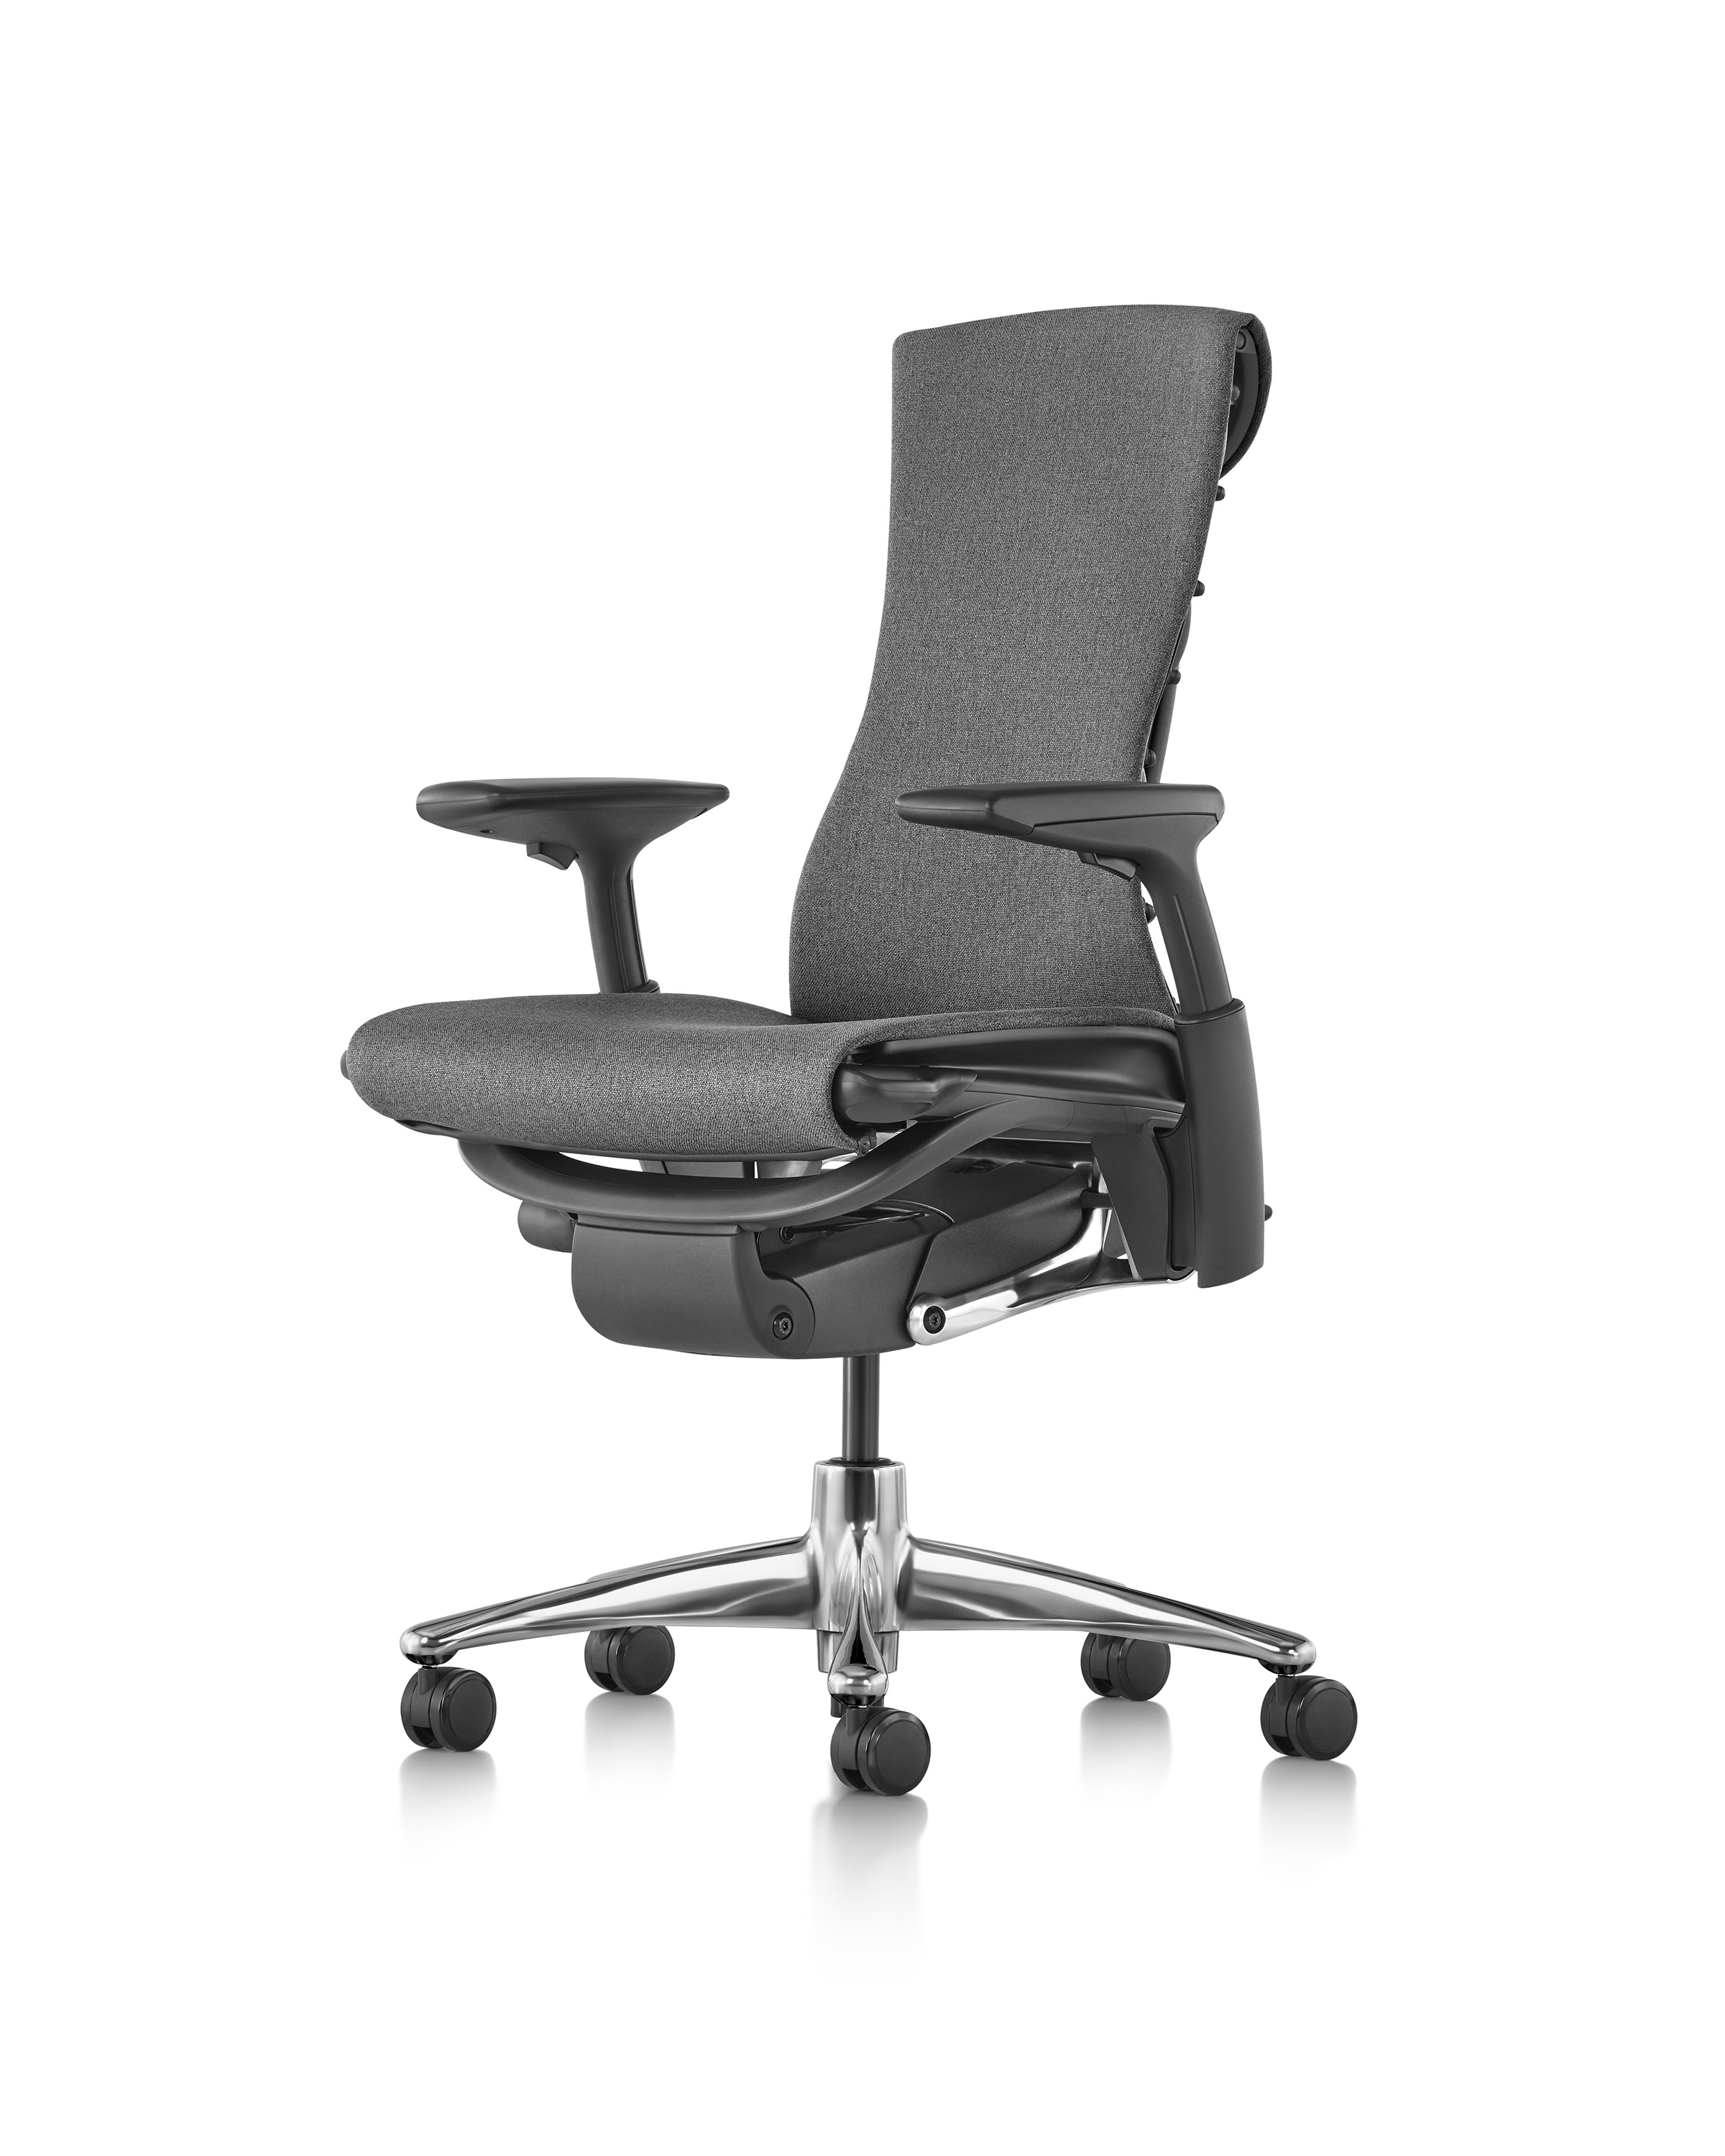 front view of grey embody chair